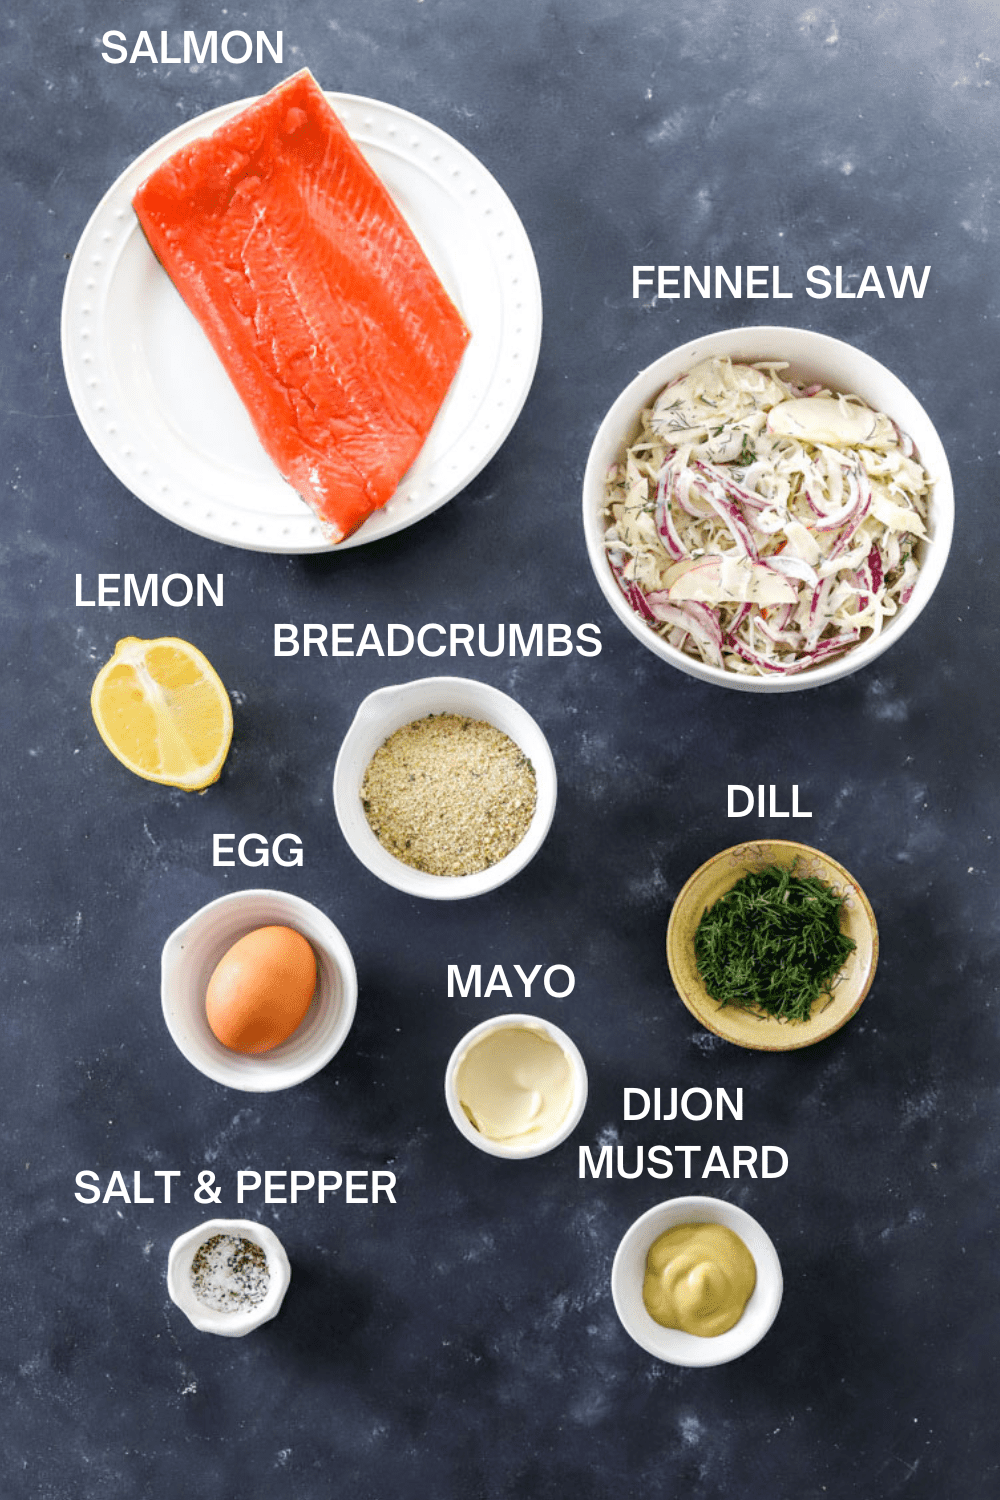 Ingredients for salmon patties with fennel slaw with labels over each ingredient. 